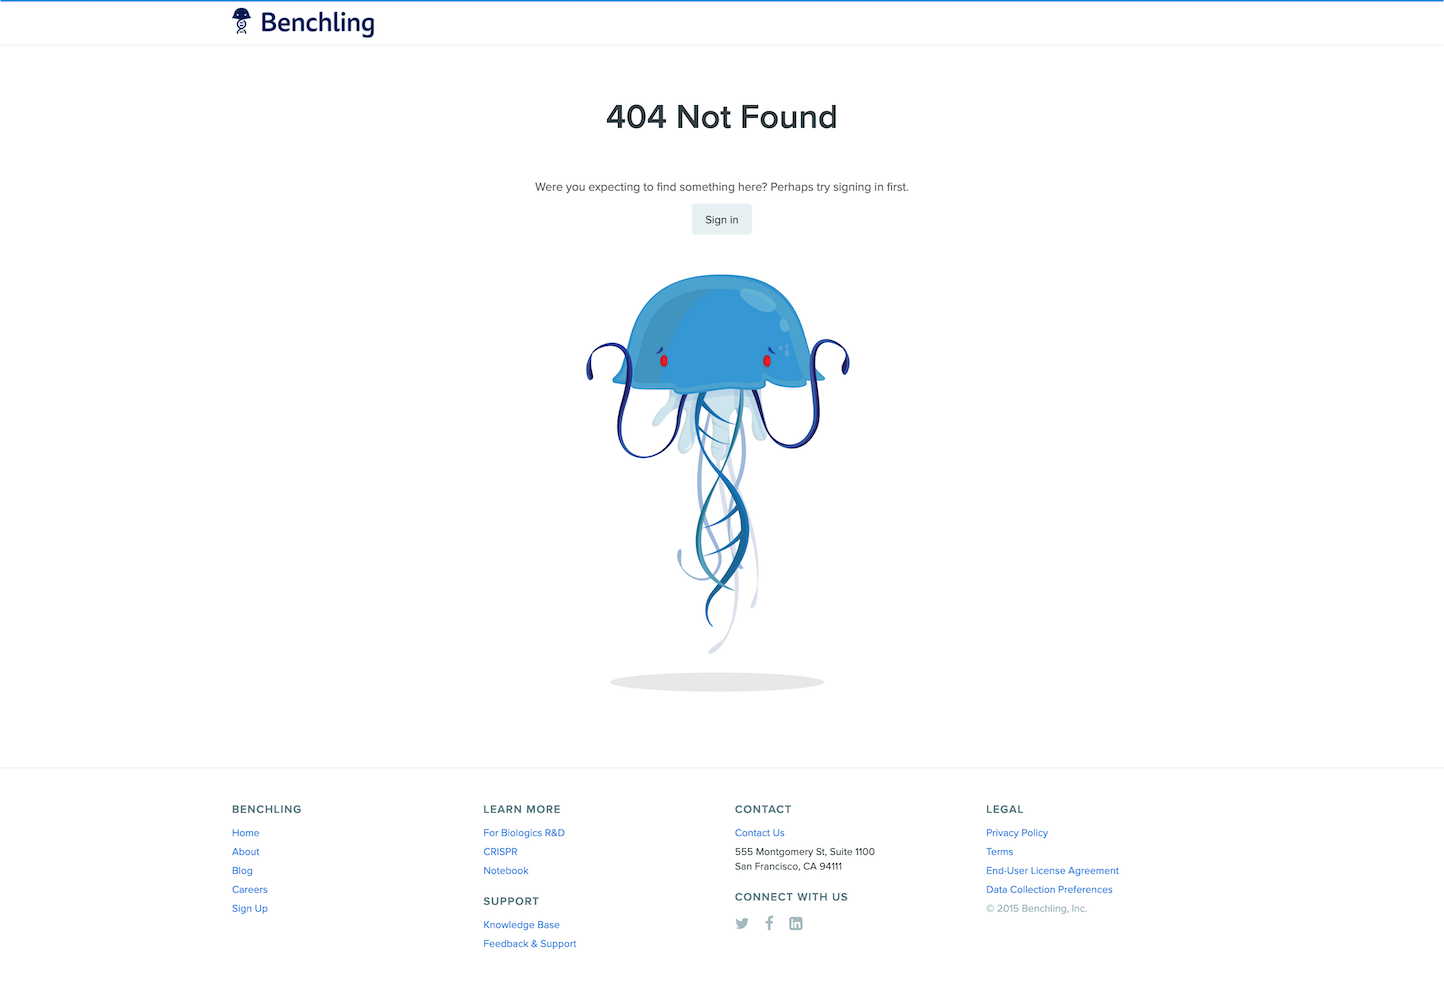 Screenshot of the 404 page from the Benchling website.